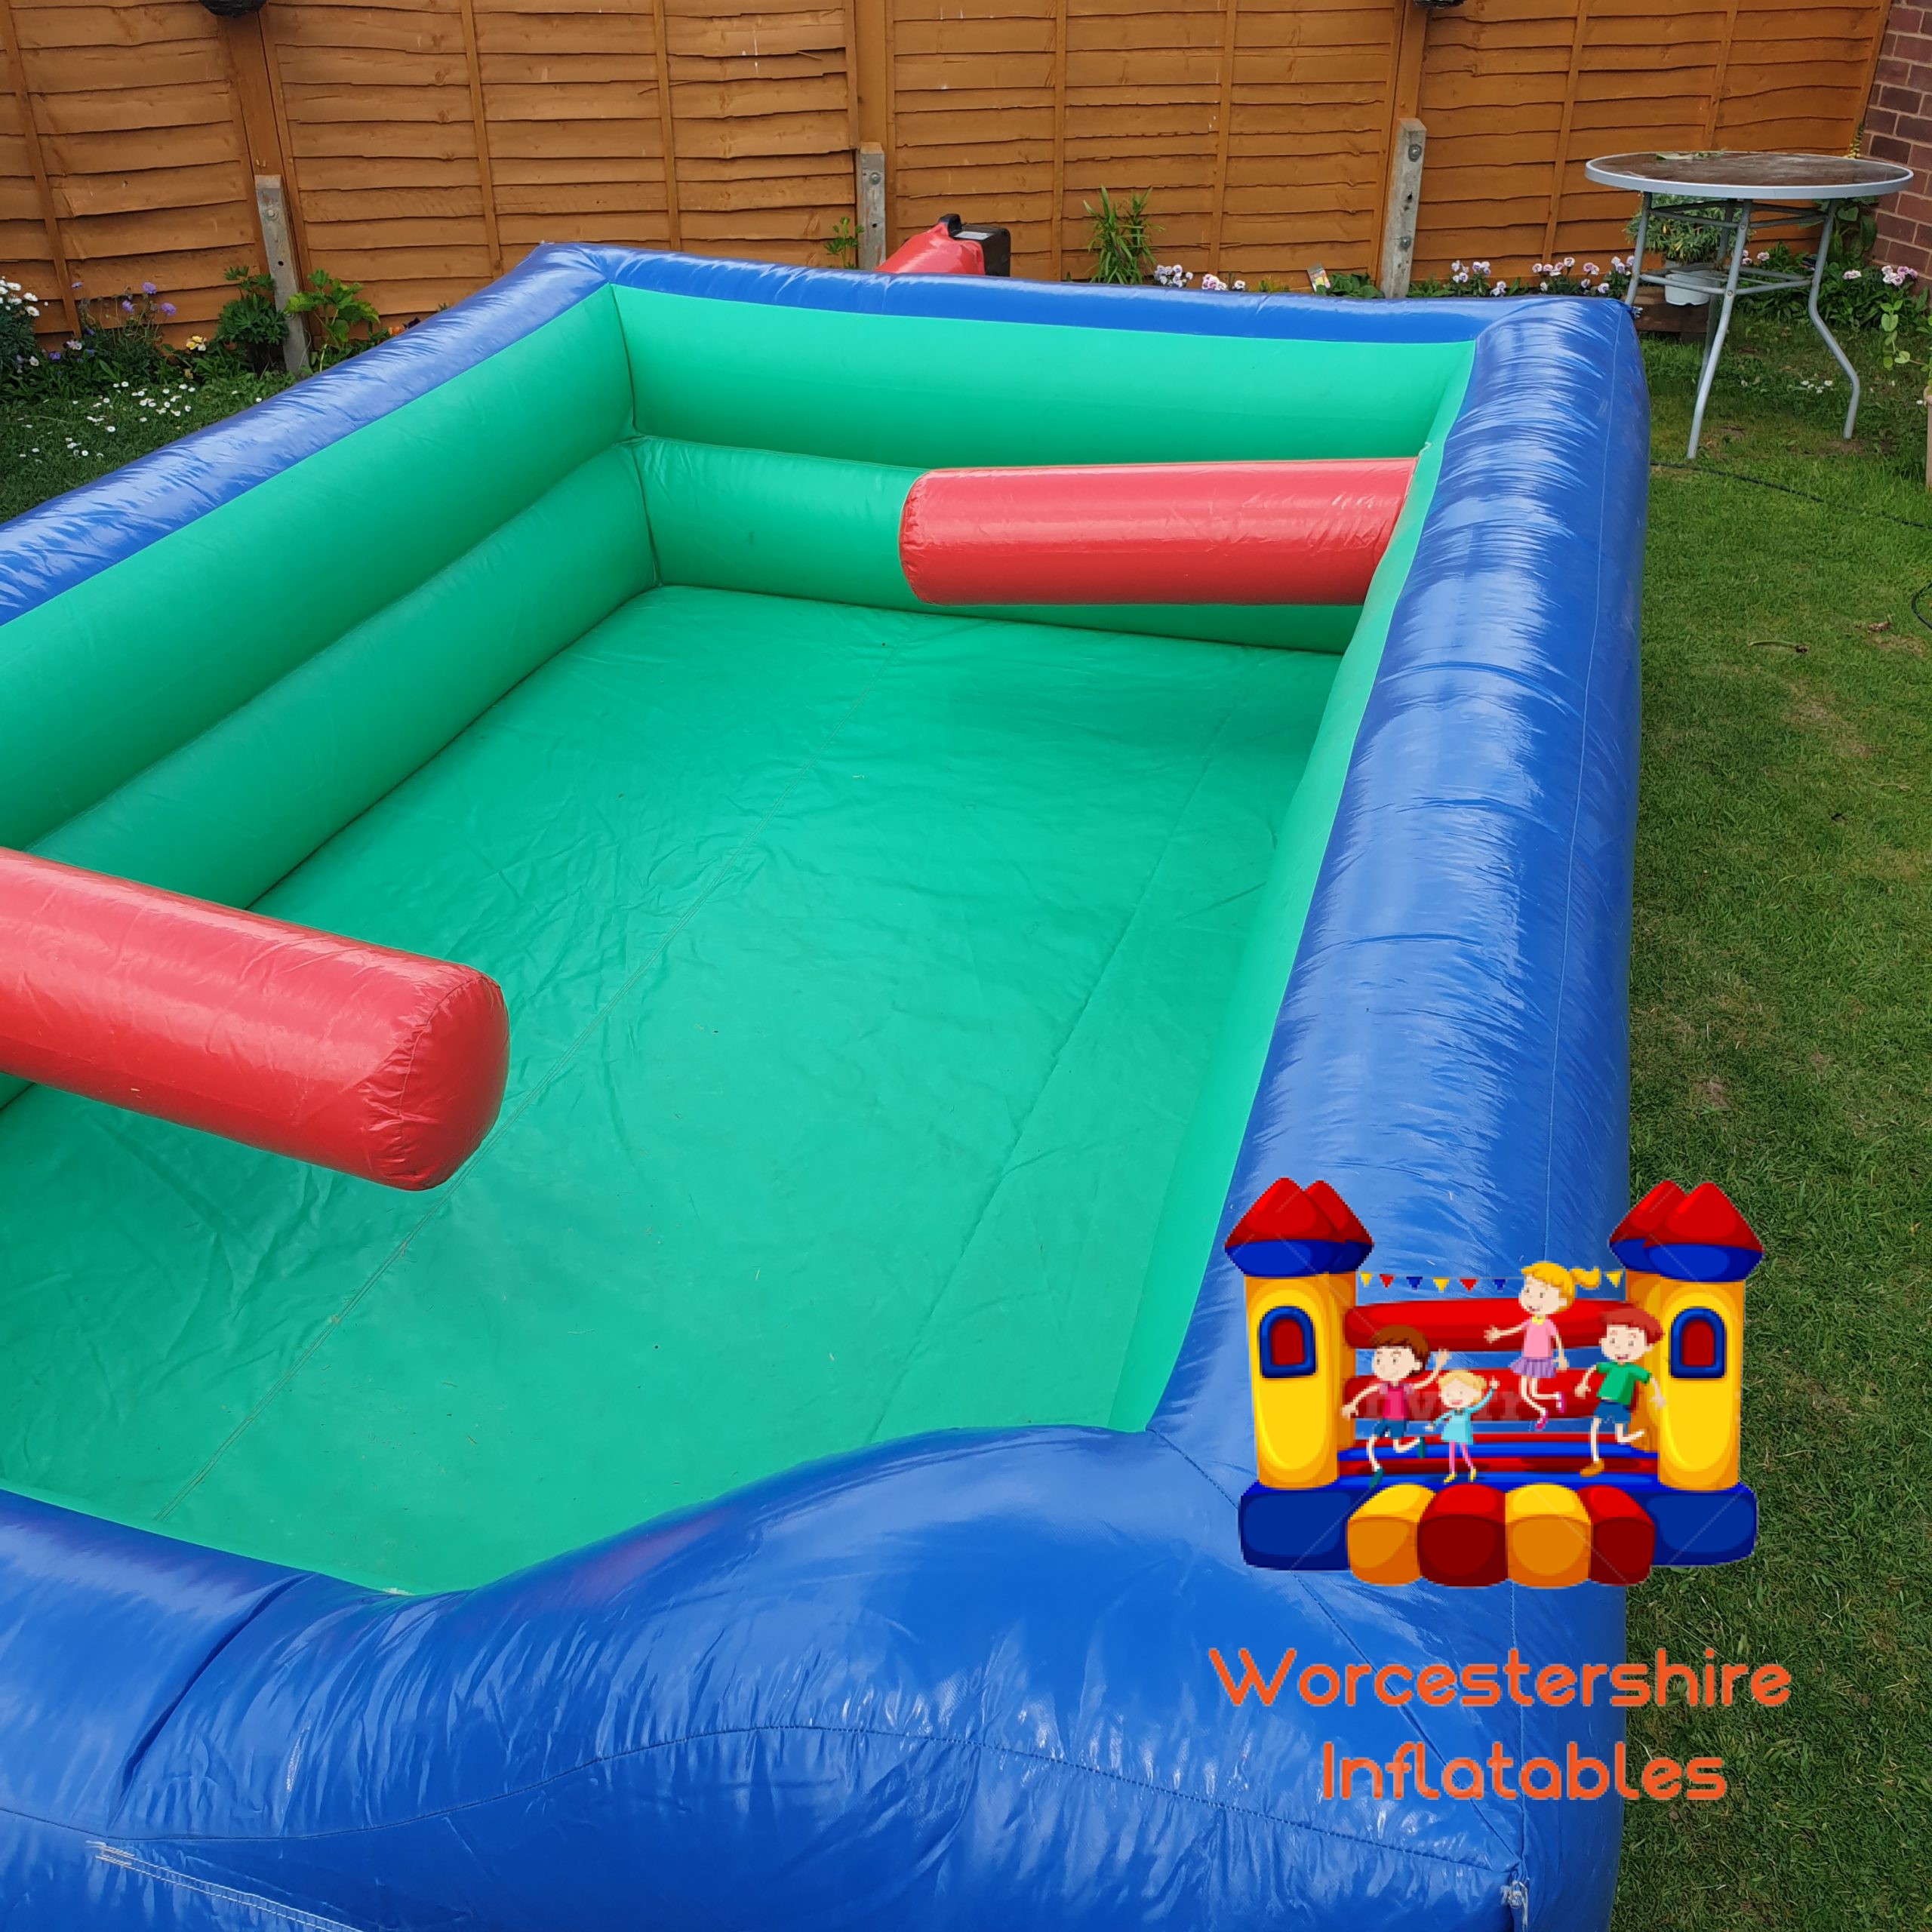 soft play area - Worcestershire inflatables